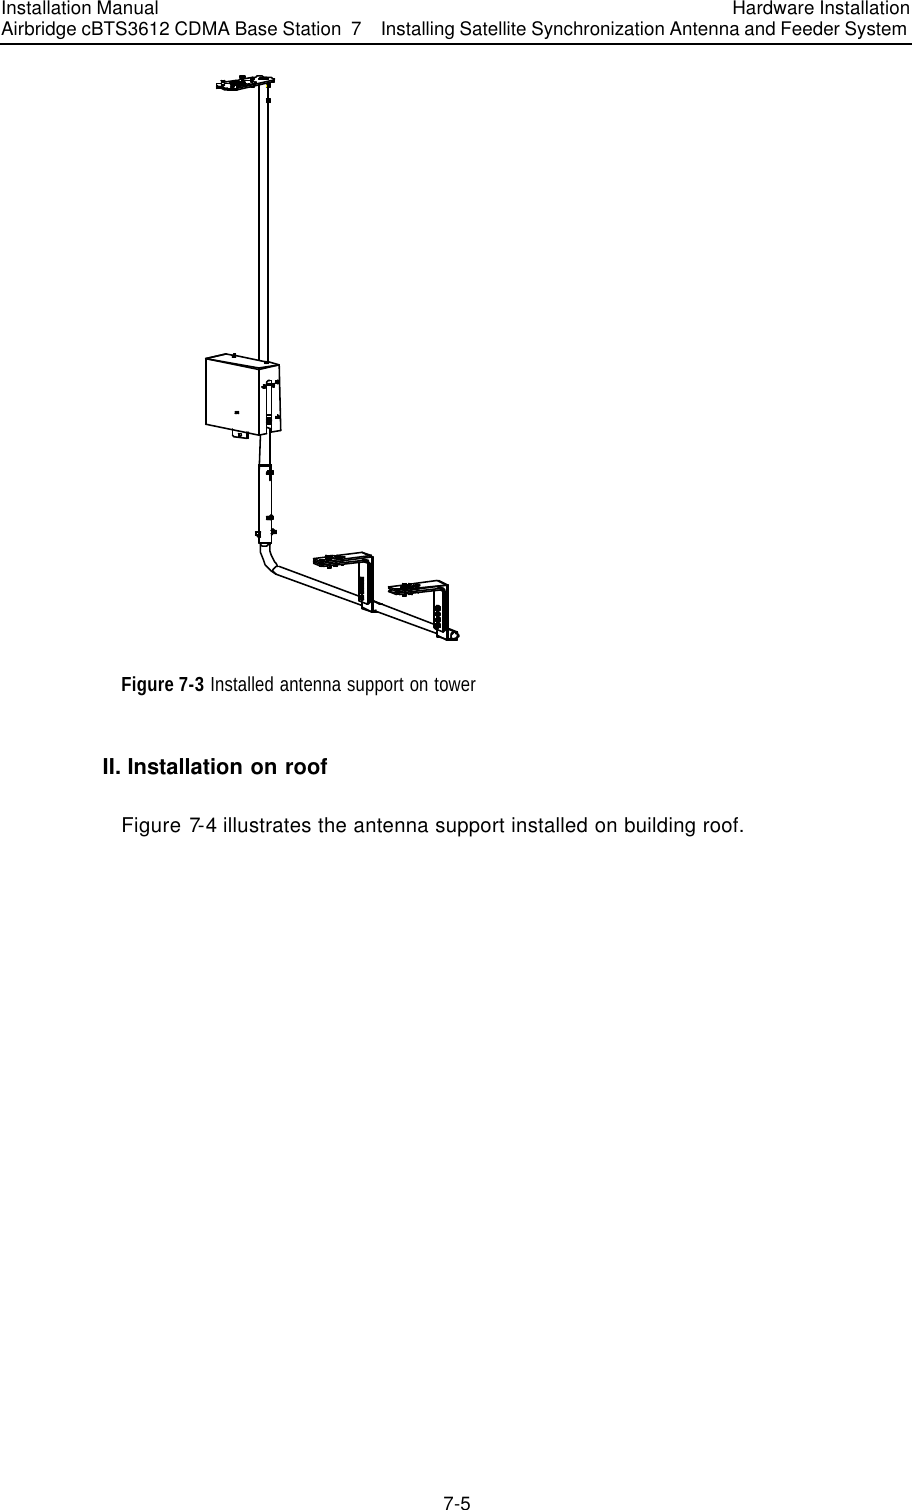 Installation Manual Airbridge cBTS3612 CDMA Base Station Hardware Installation 7  Installing Satellite Synchronization Antenna and Feeder System  7-5　 Figure 7-3 Installed antenna support on tower II. Installation on roof Figure 7-4 illustrates the antenna support installed on building roof. 